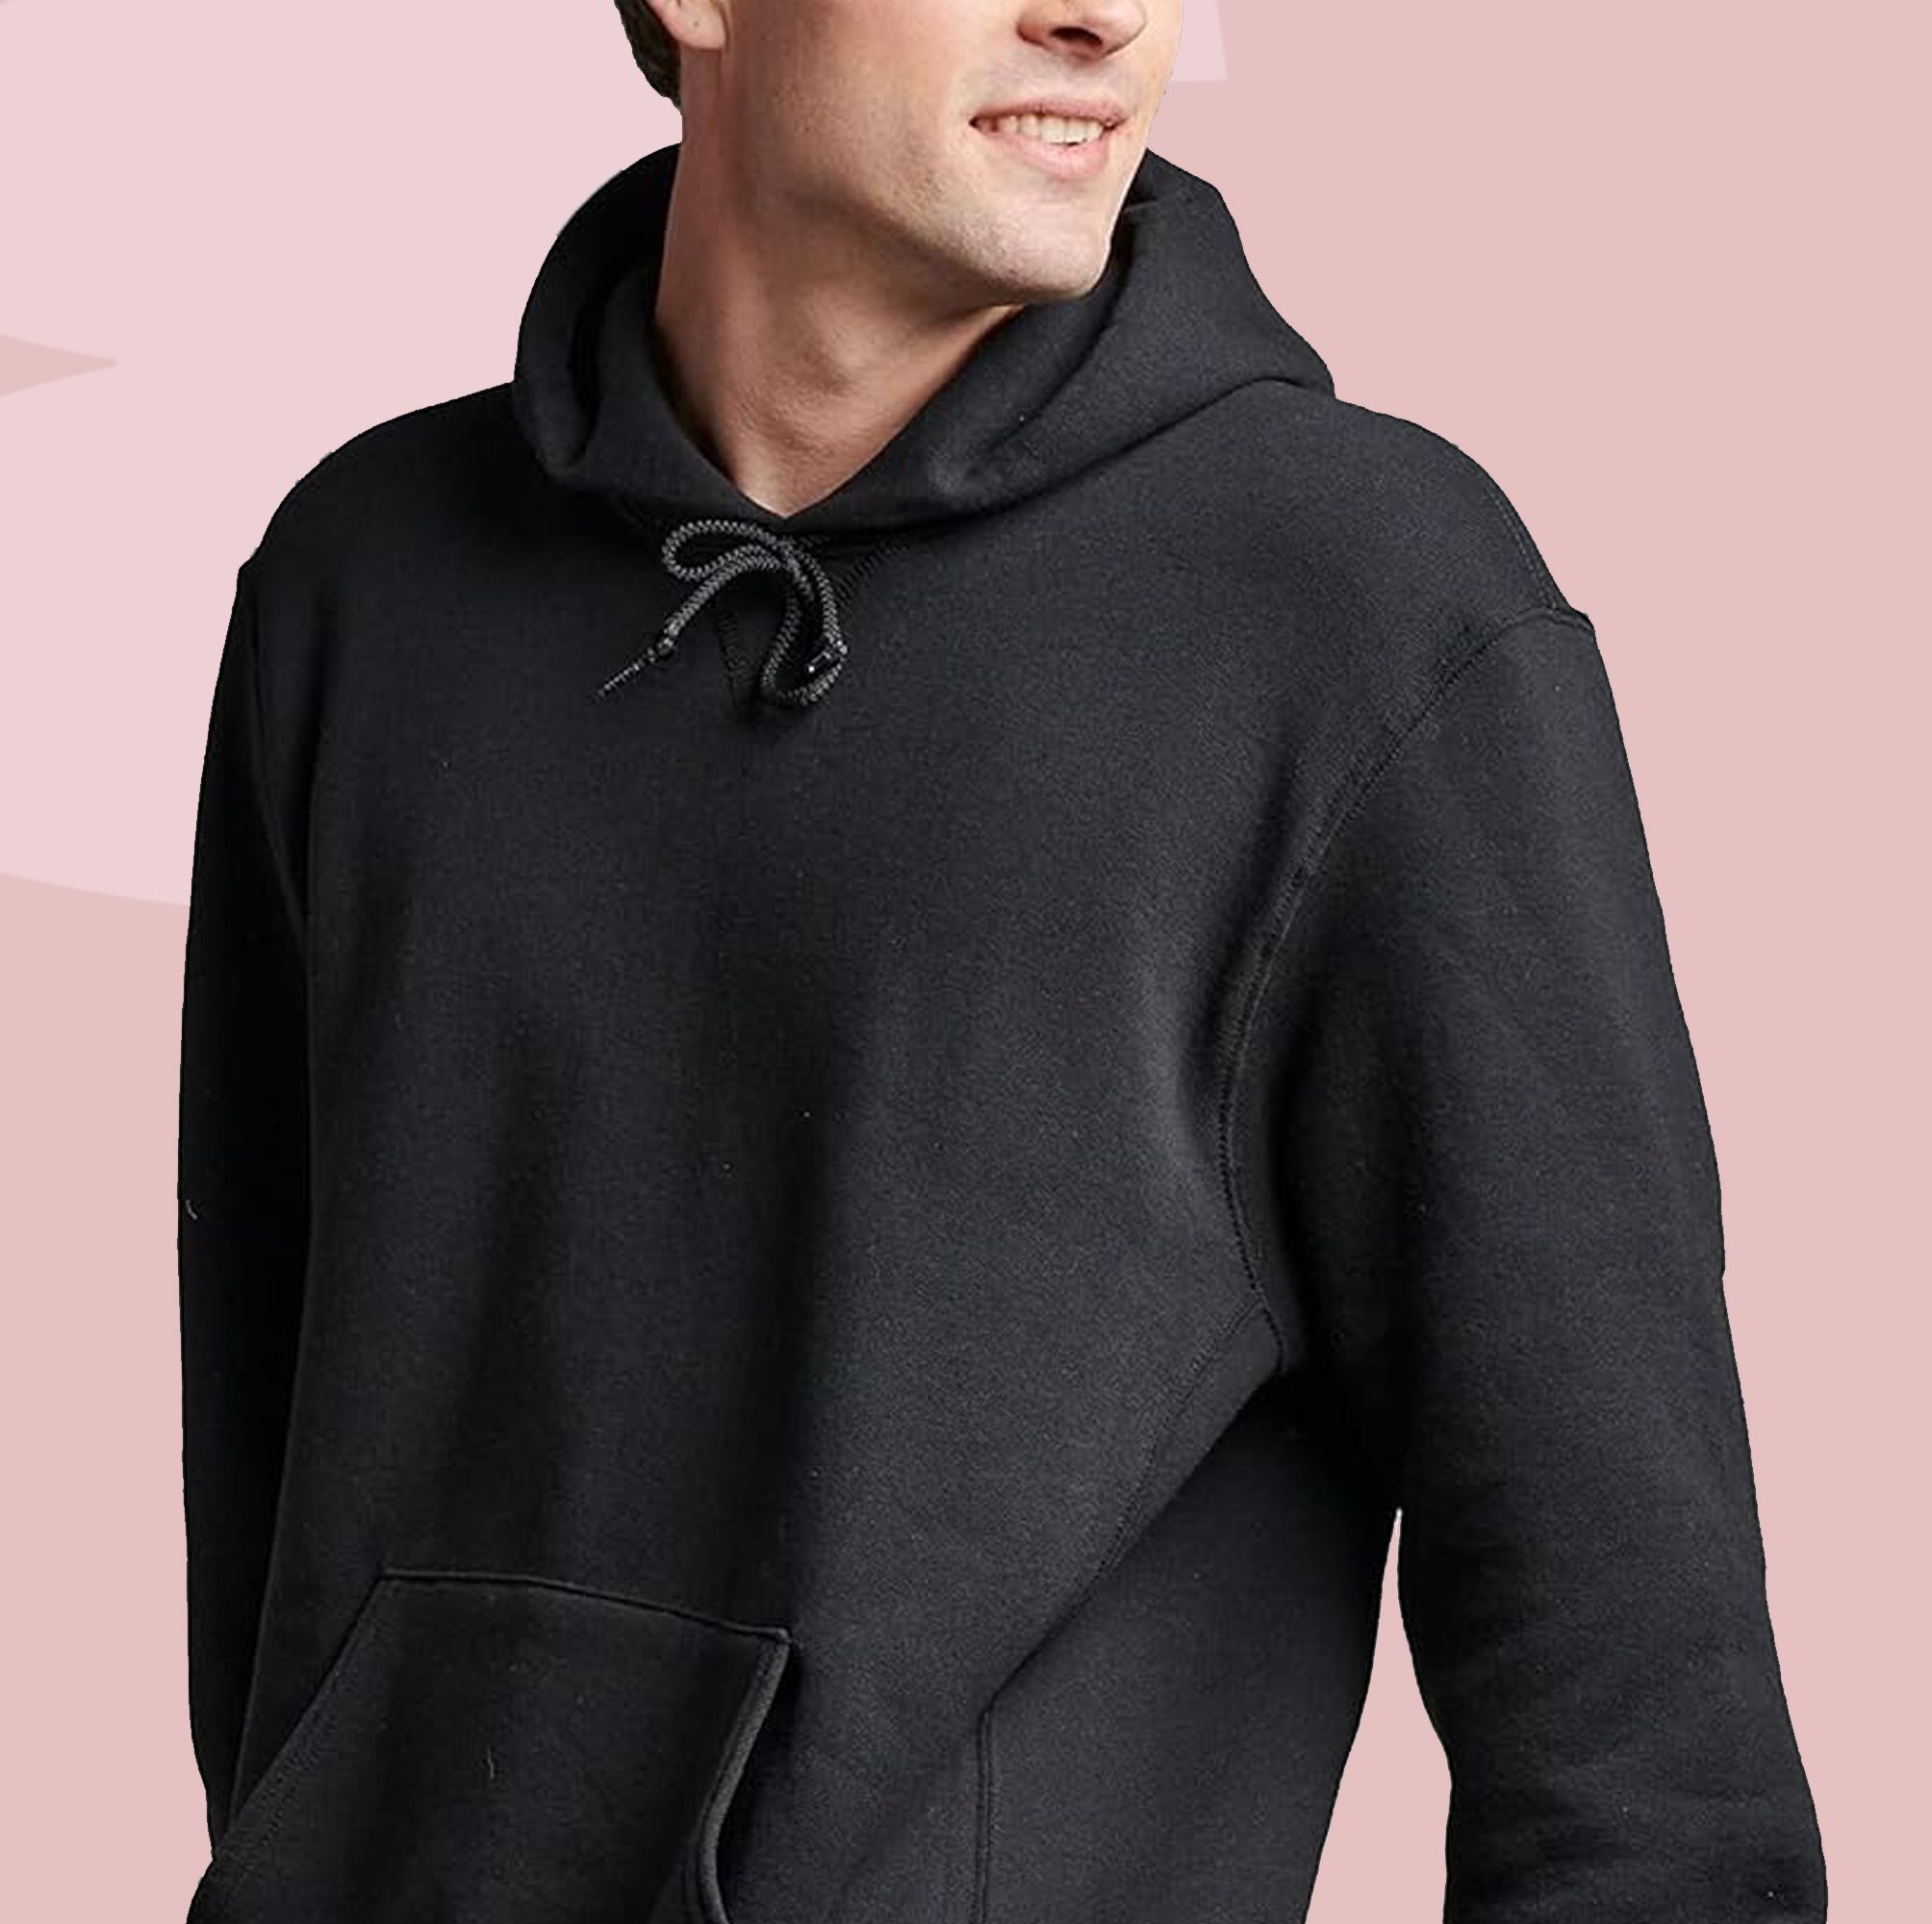 17 Hoodies From Amazon That'll Never Do You Wrong